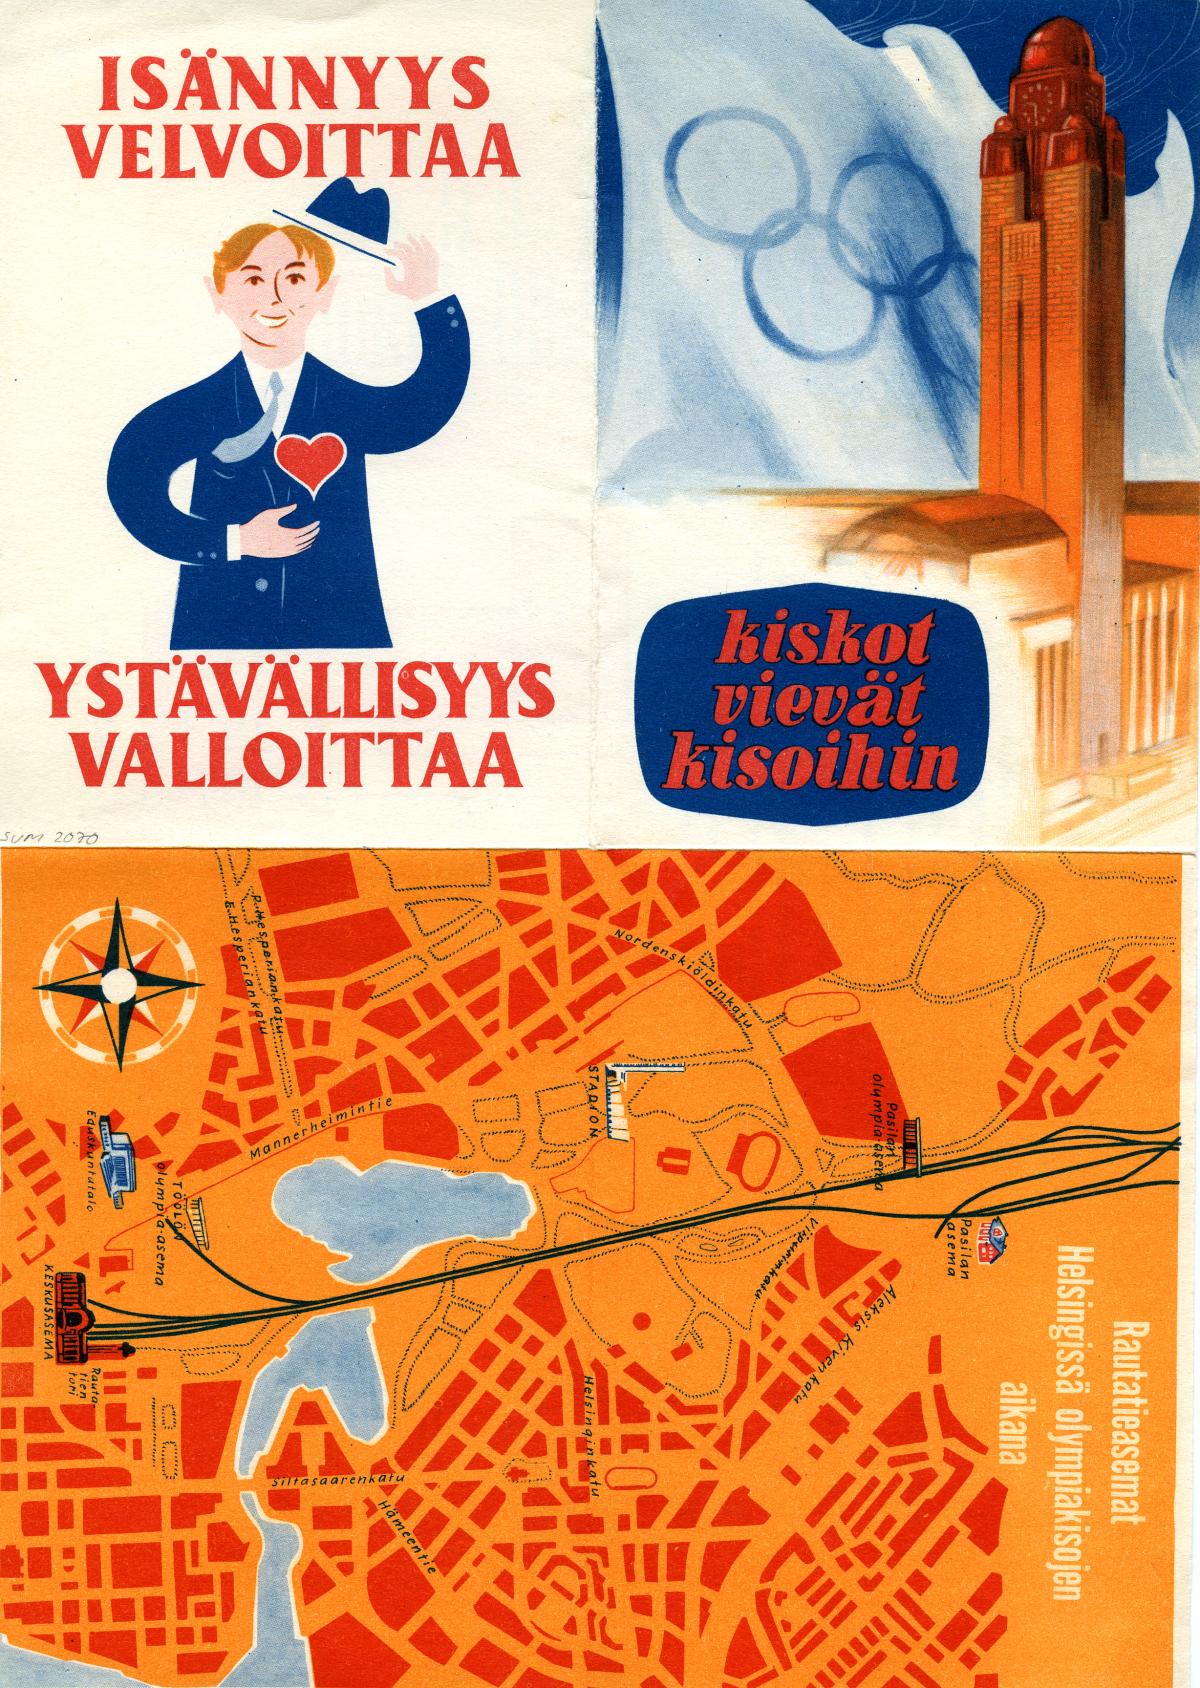 A brochure about the Helsinki Games, including a map of the city’s railway stations. Photograph: Sports Museum of Finland Photo: Urheilumuseo